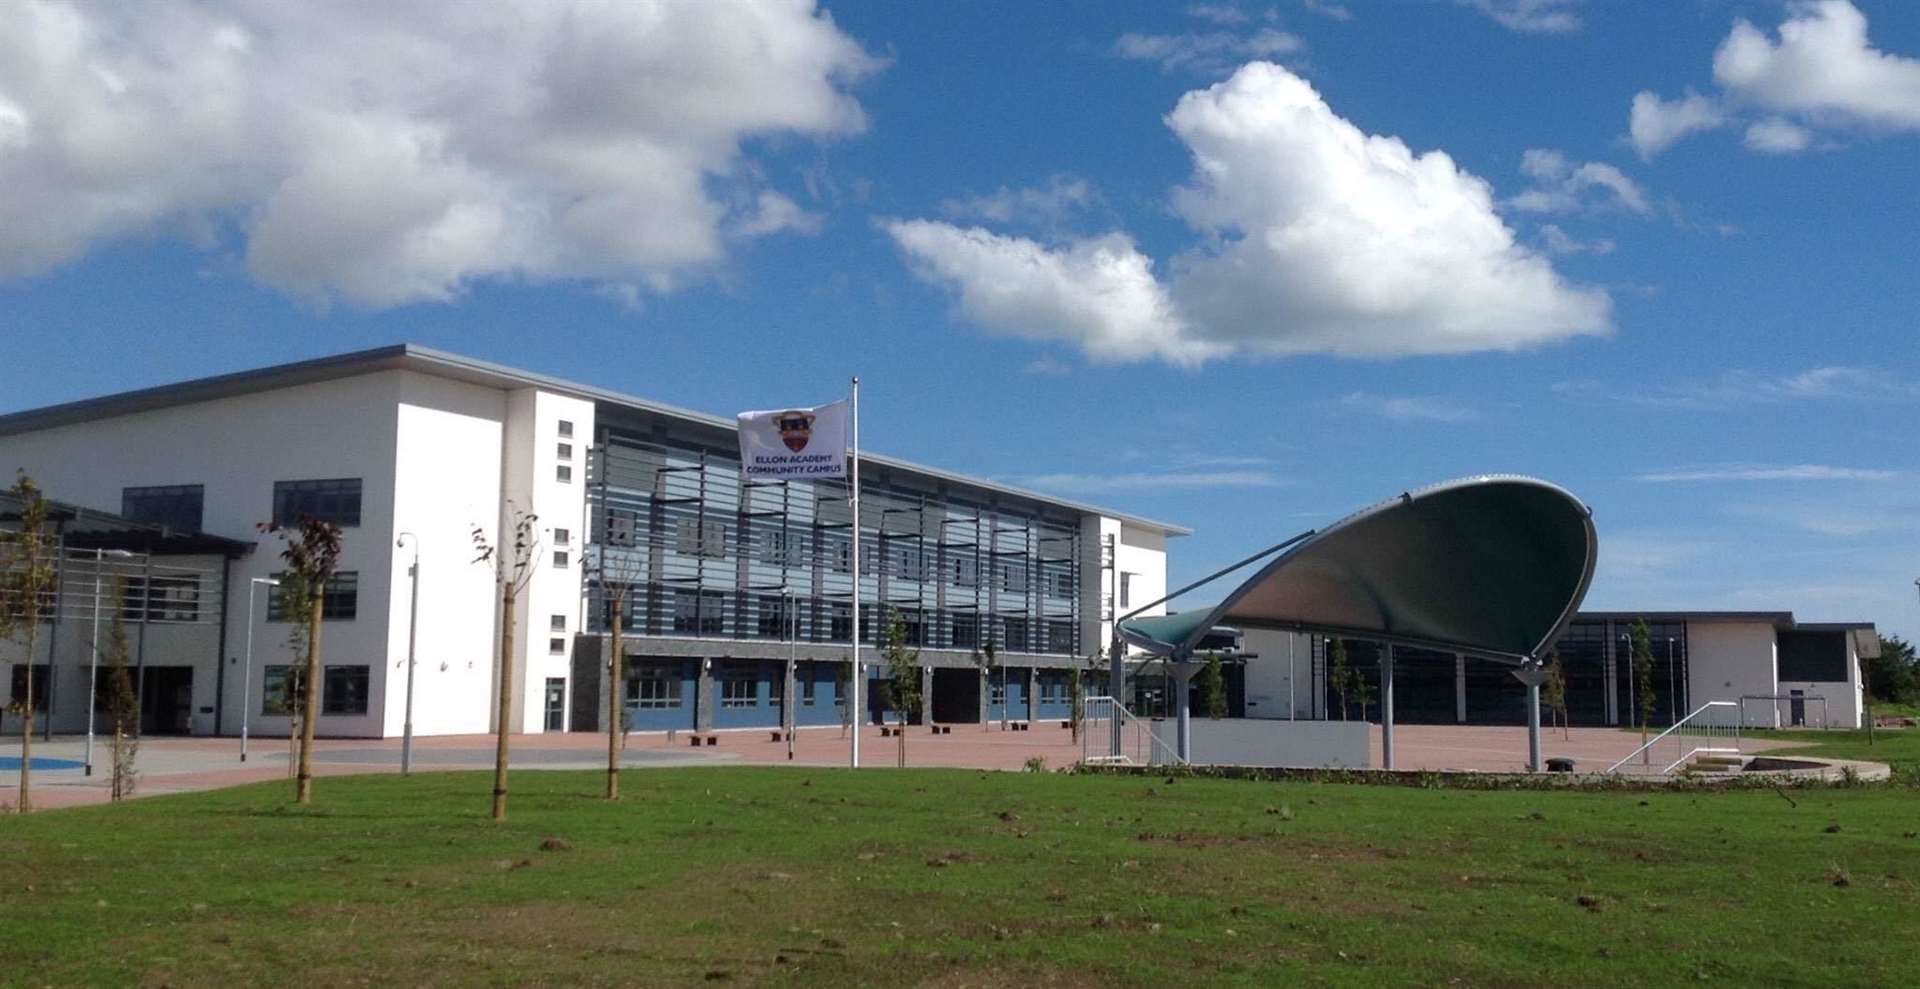 New links will add bus services to Ellon Academy.